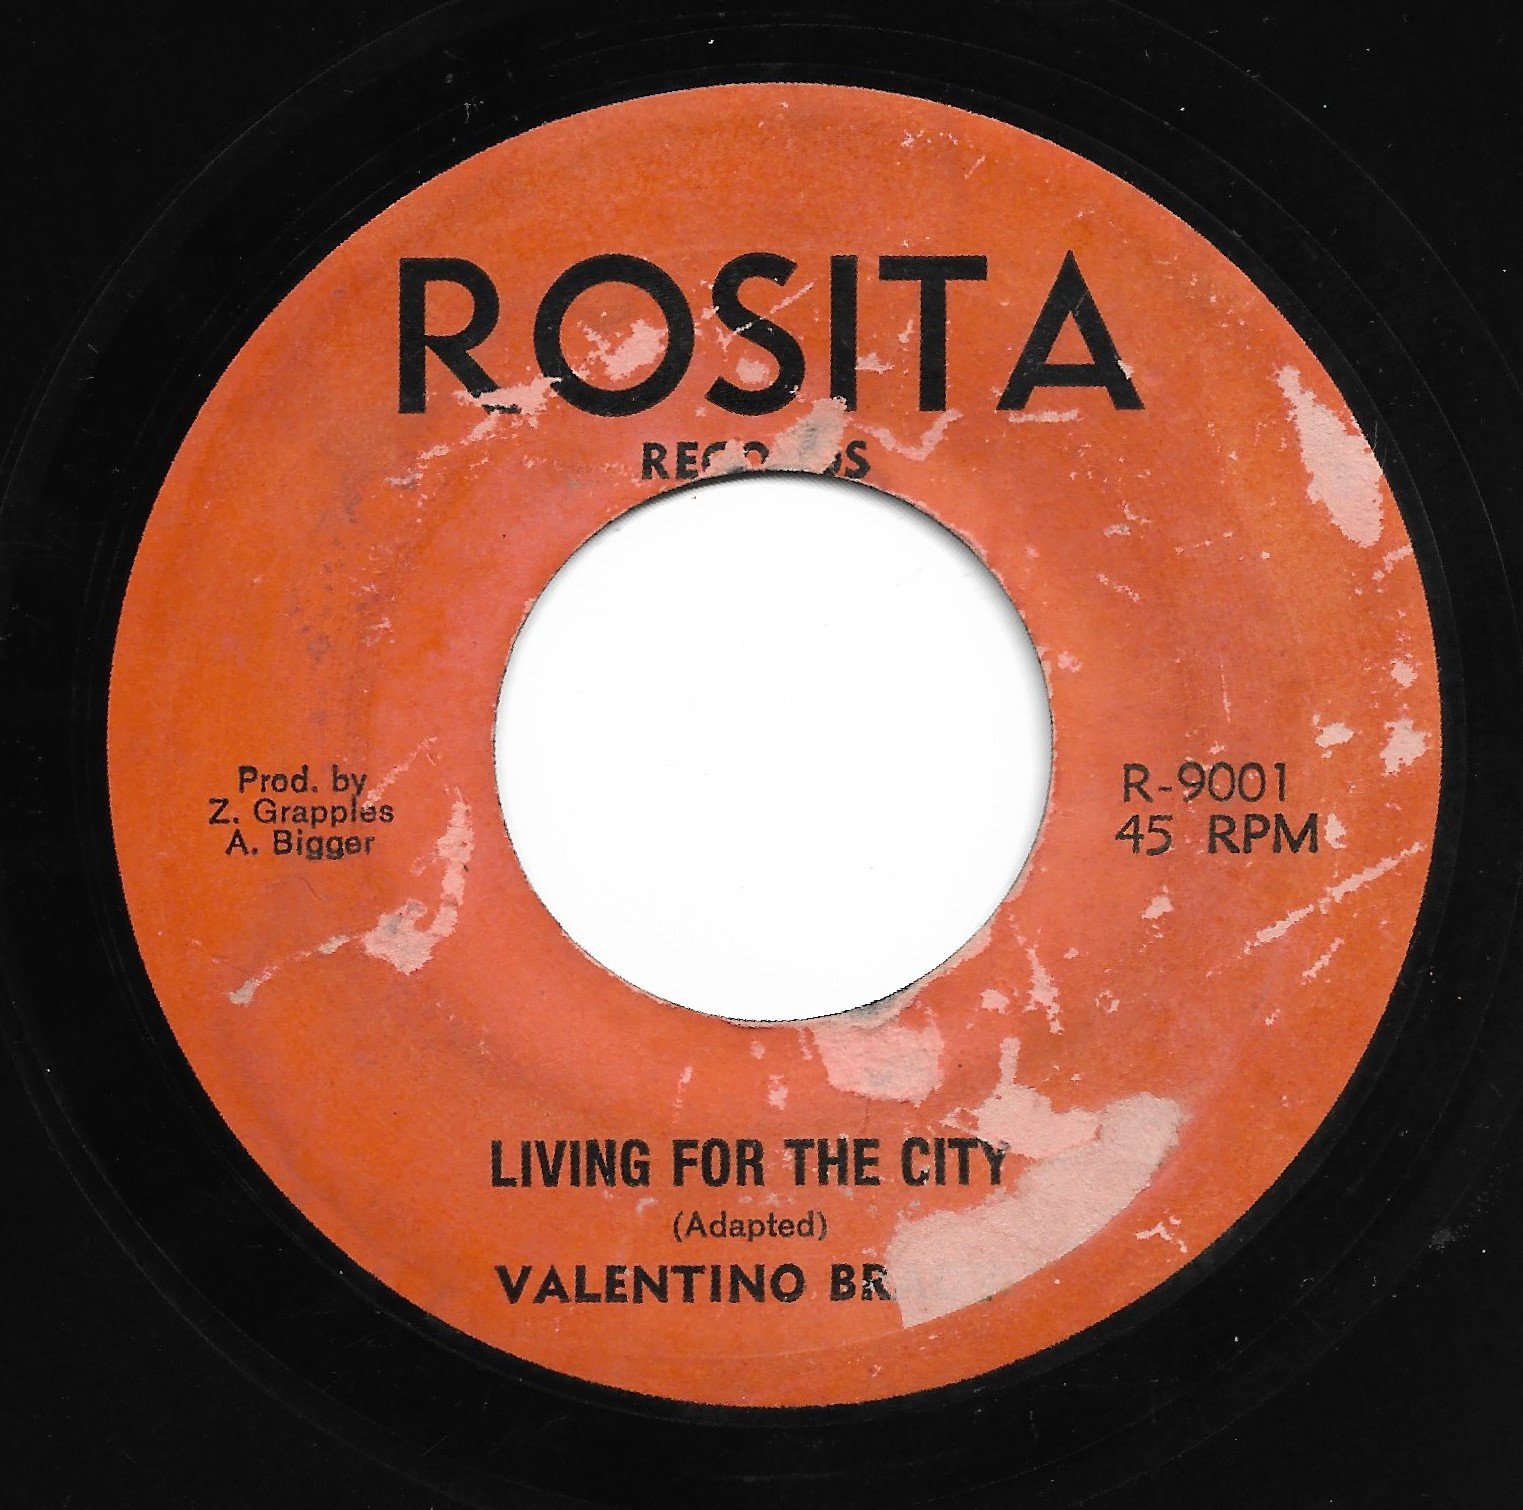 Living For the City - S34A Vinyl Record 45. Ultrafunk 